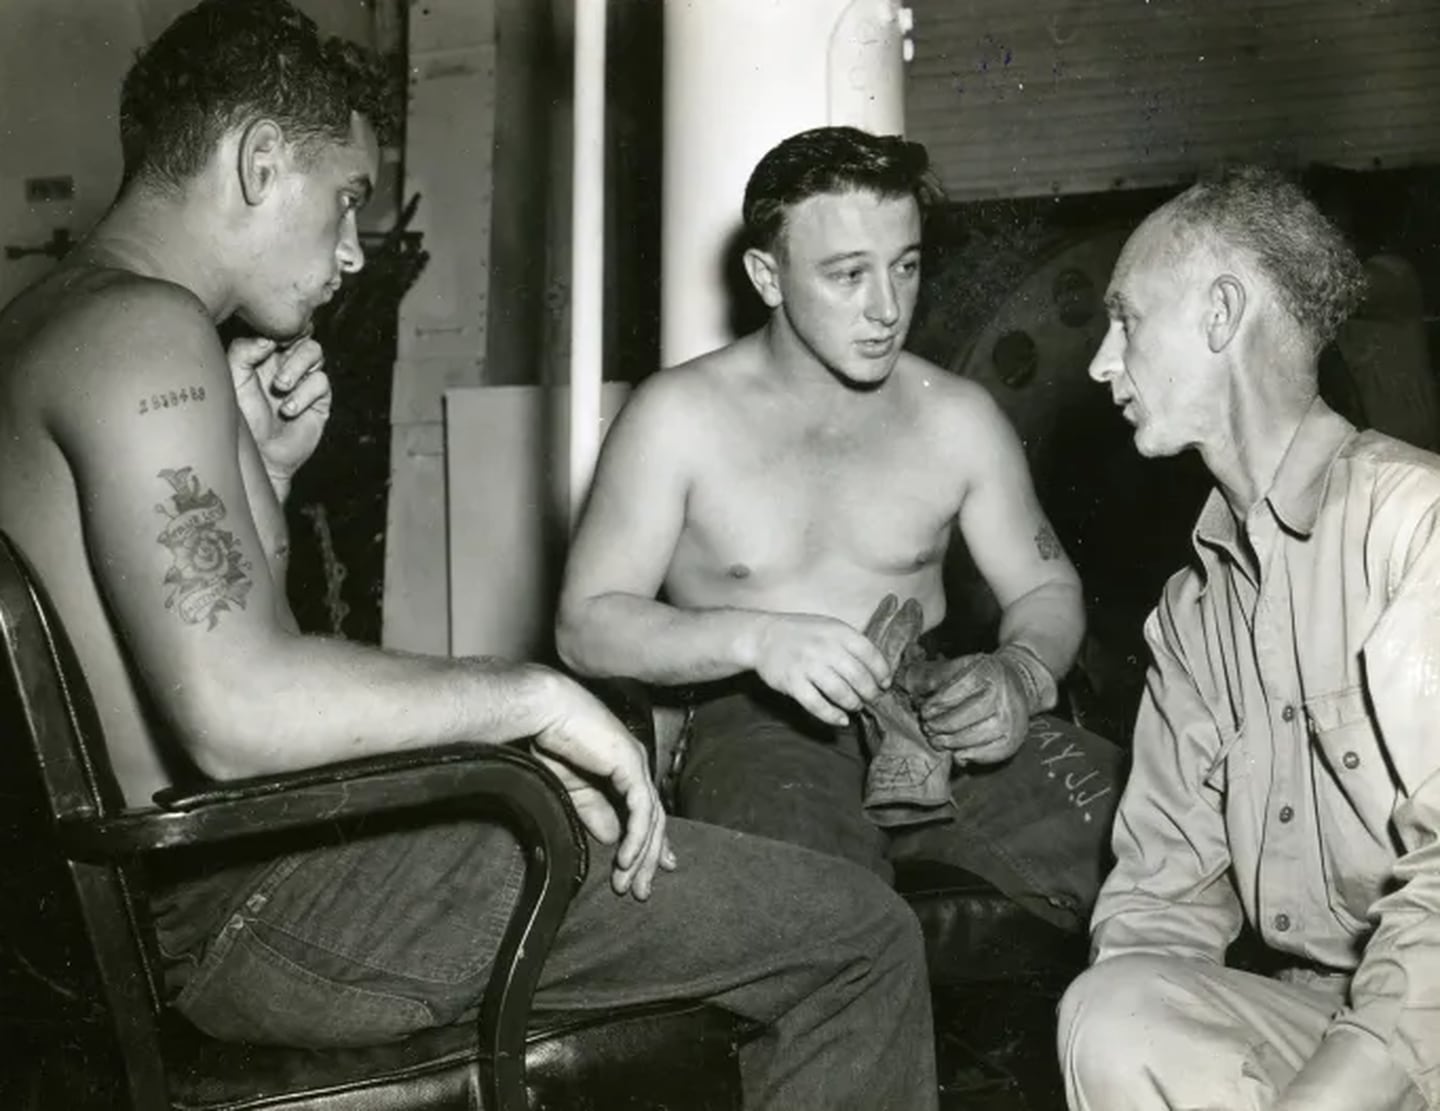 Ernie Pyle, war correspondent, interviews Joe J. Ray and Charles W. Page on board the USS Yorktown on Feb. 5, 1945.